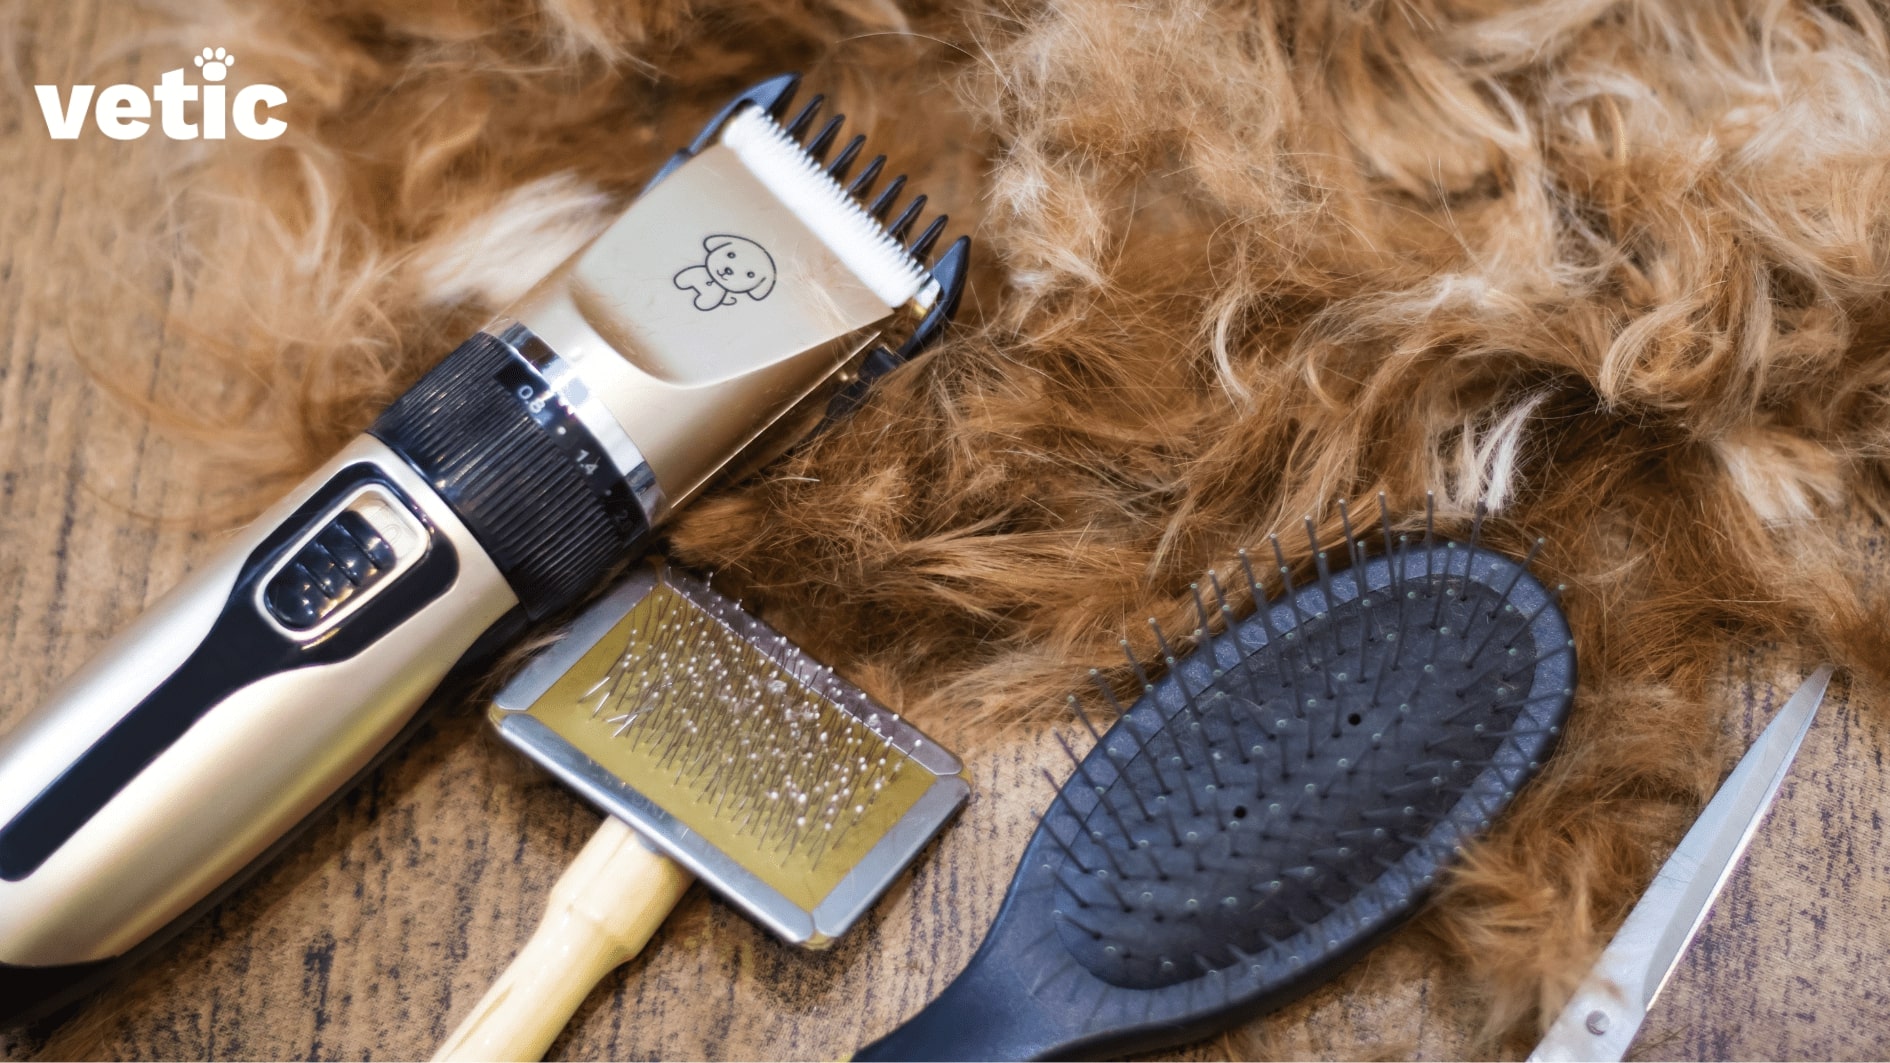 Dog grooming tools. A professional trimmer, deshedder brush, regular hair brush and comb beside piles of brown fur